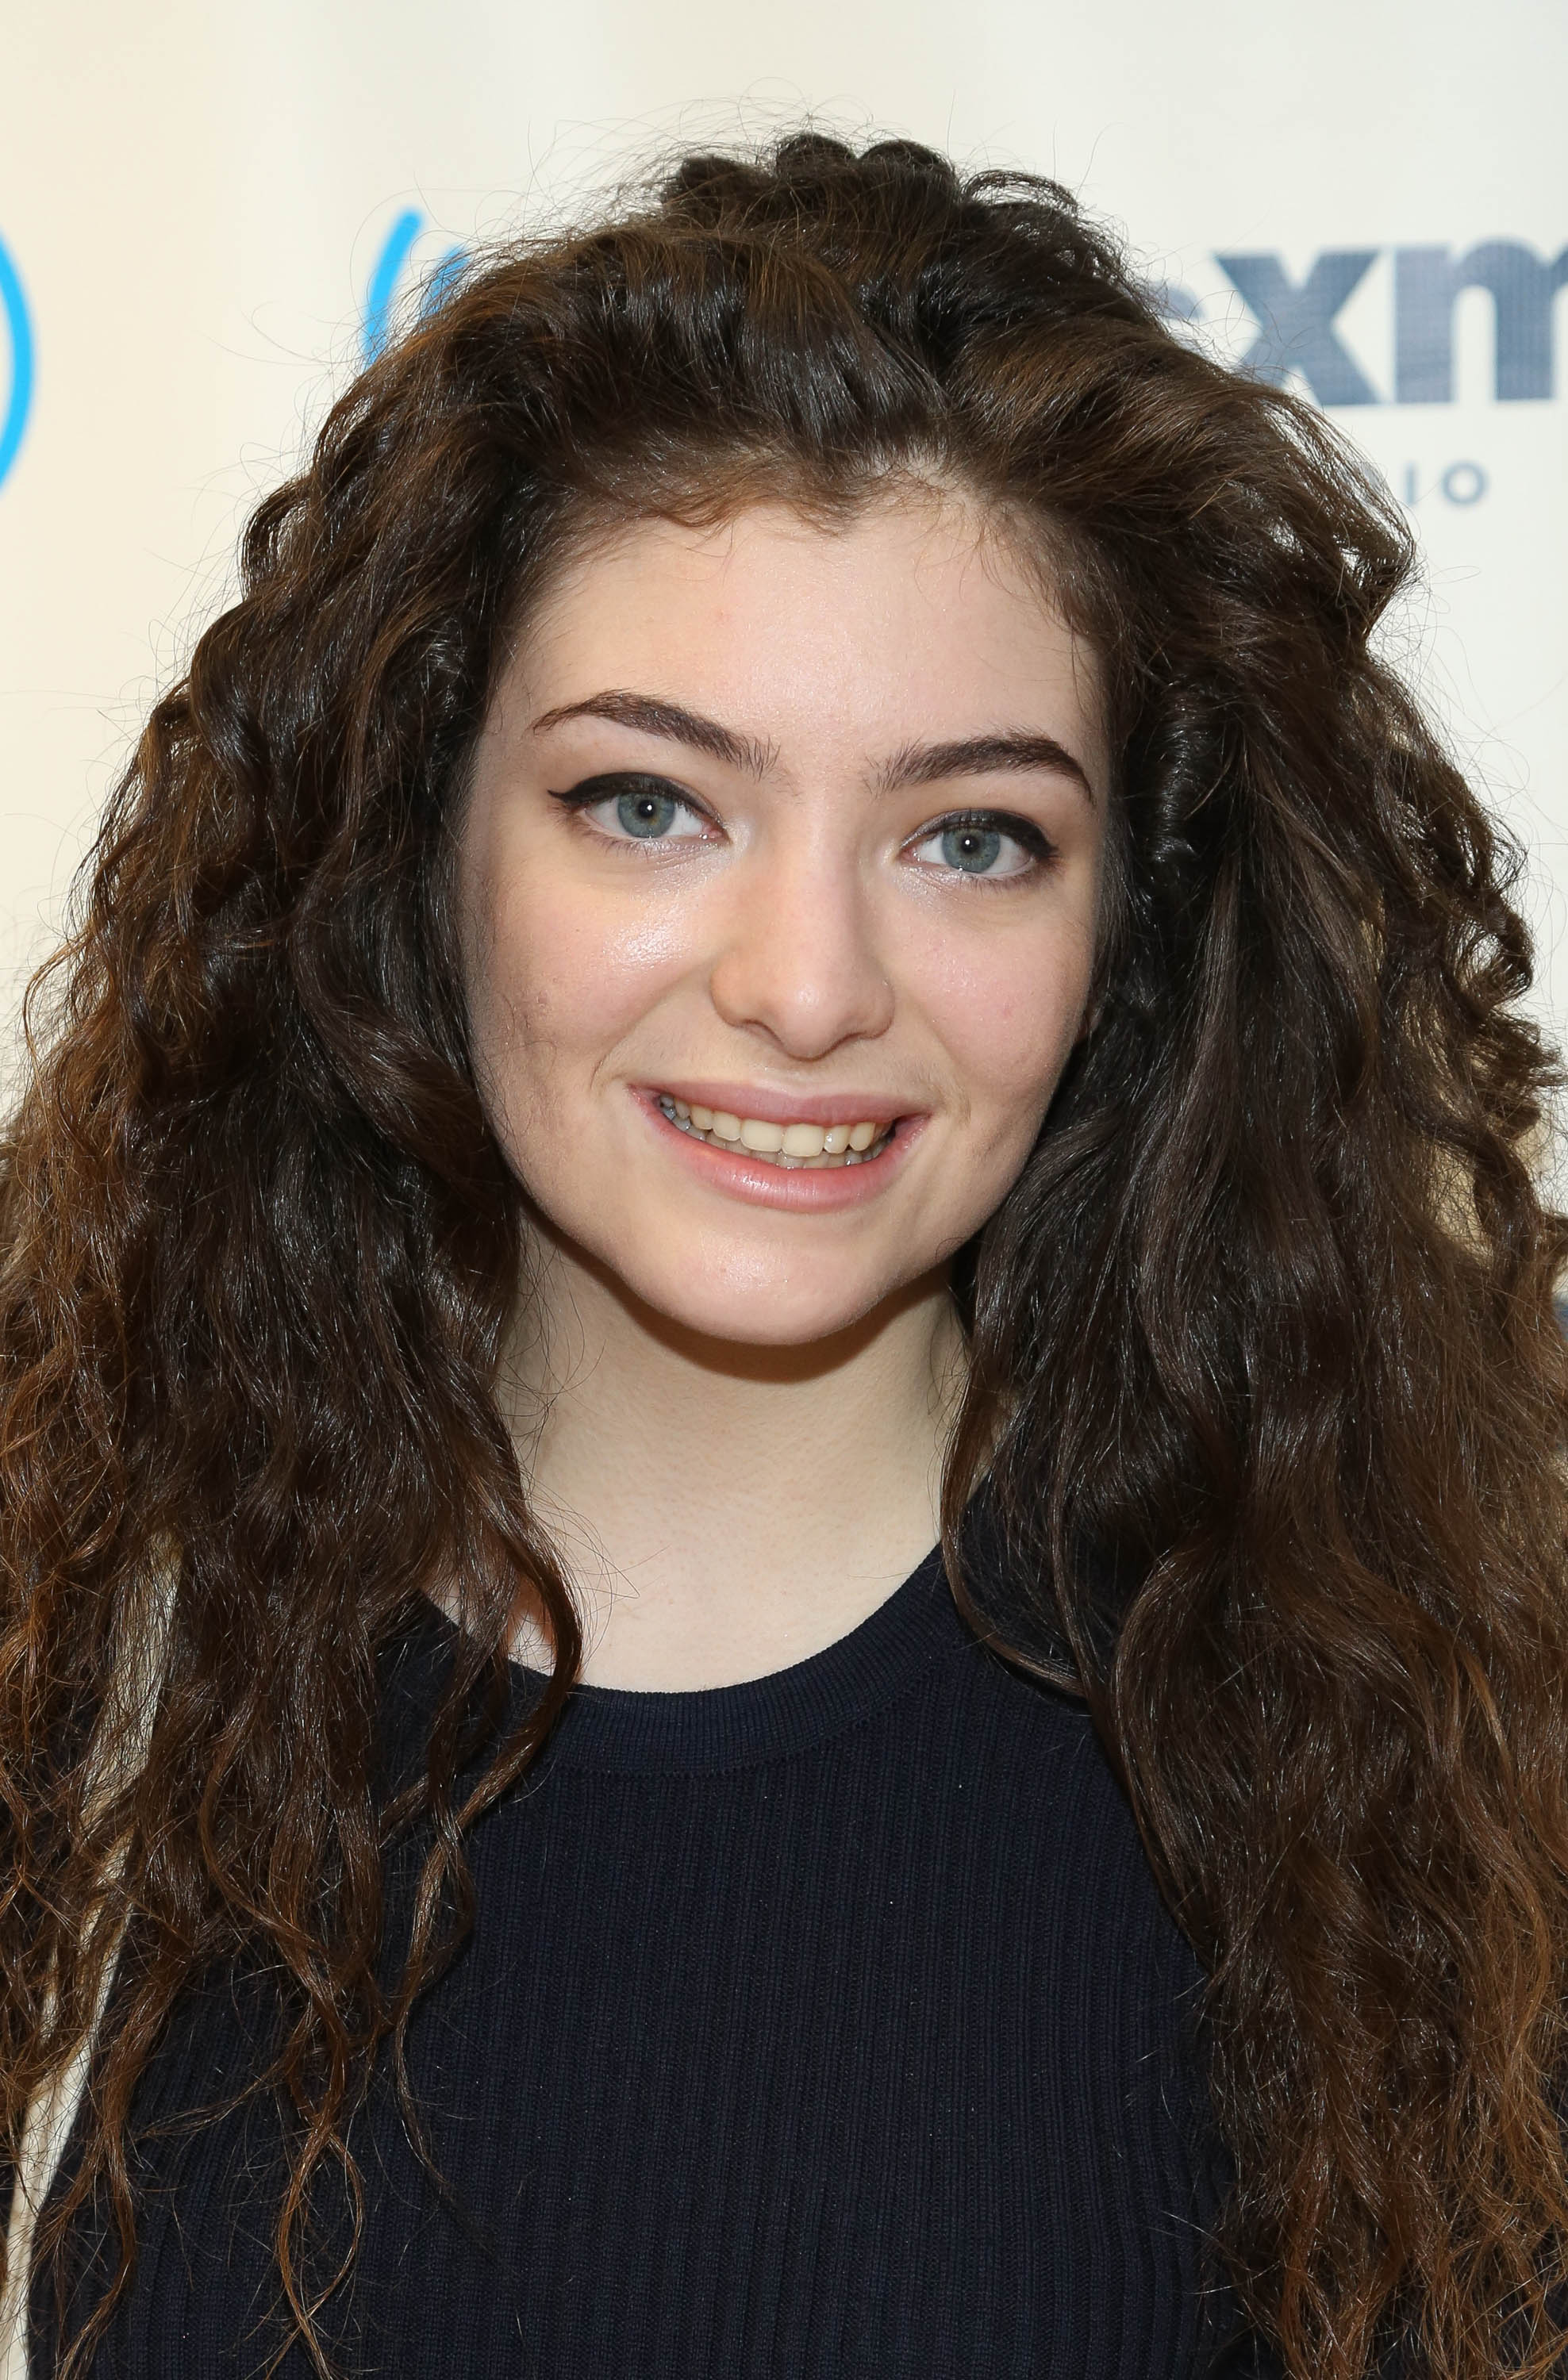 Lorde visits SiriusXM Studios on August 5, 2013 in New York City. | Photo: Getty Images